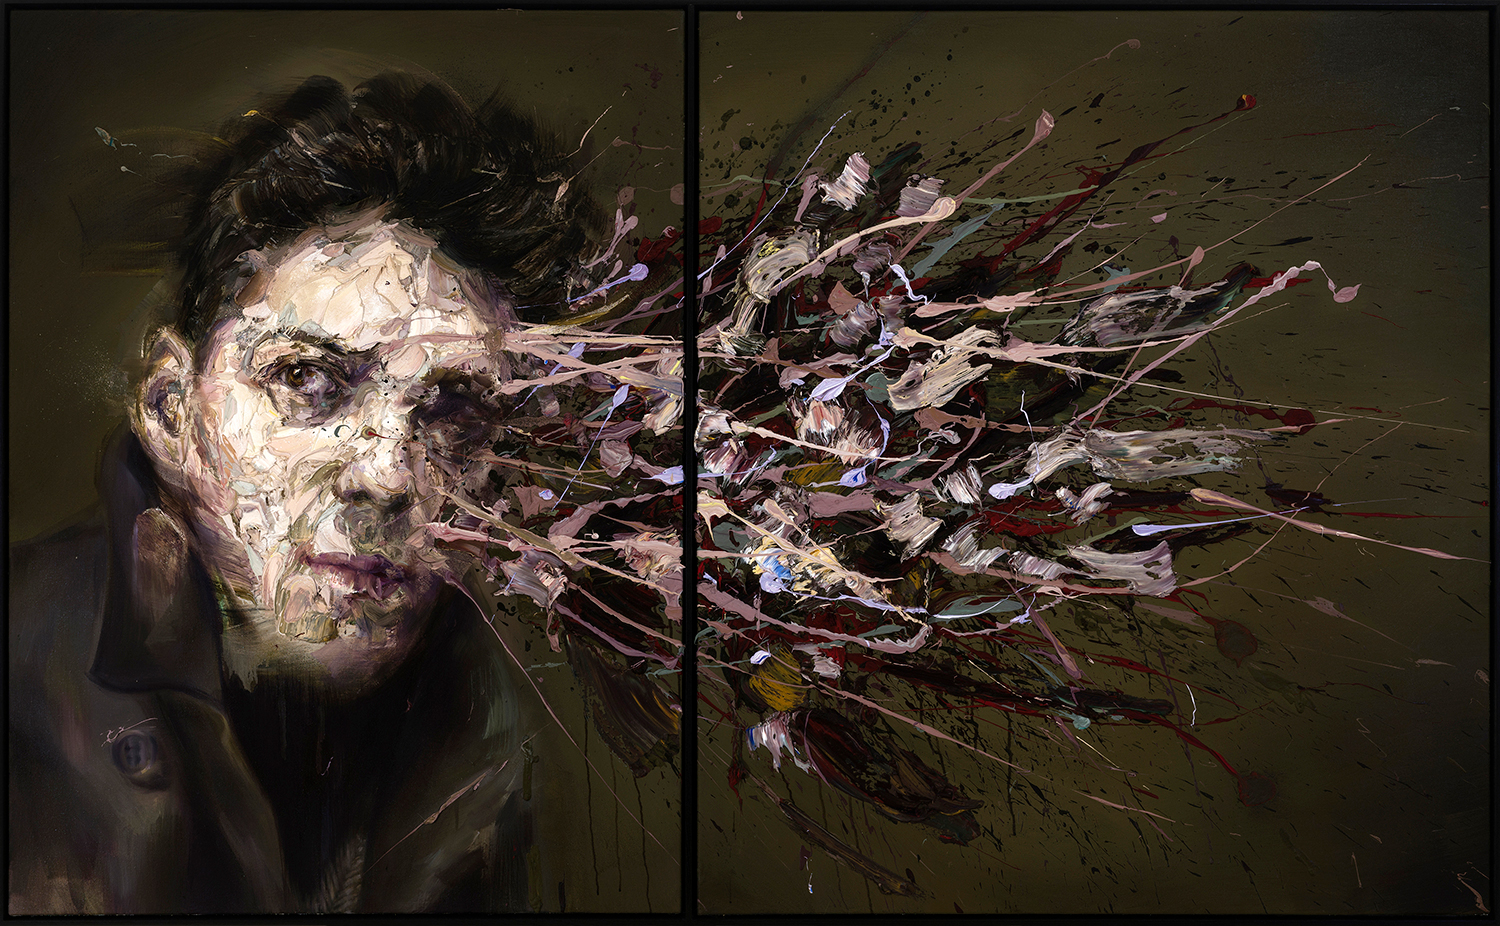 A portrait by Mathieu Laca of Jean-Paul Riopelle, Quebec painting's force of nature.